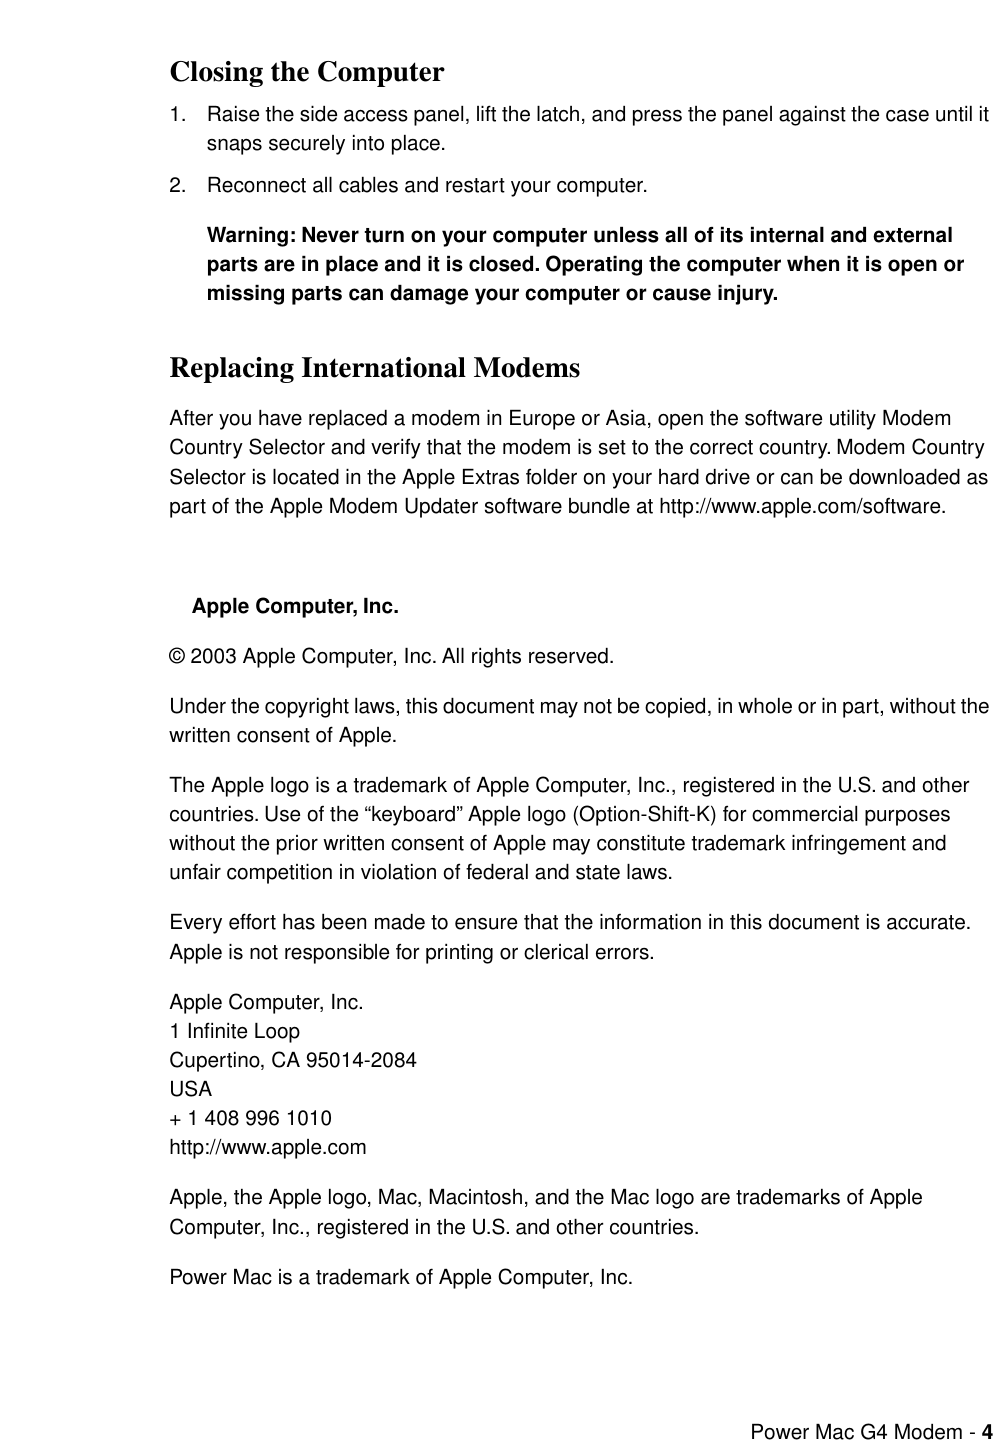 Page 4 of 4 - Apple Power Mac G4 (QuickSilver 2002) User Manual And Macintosh Server - Modem Replacement Instructions G4mdd-fw800-modem